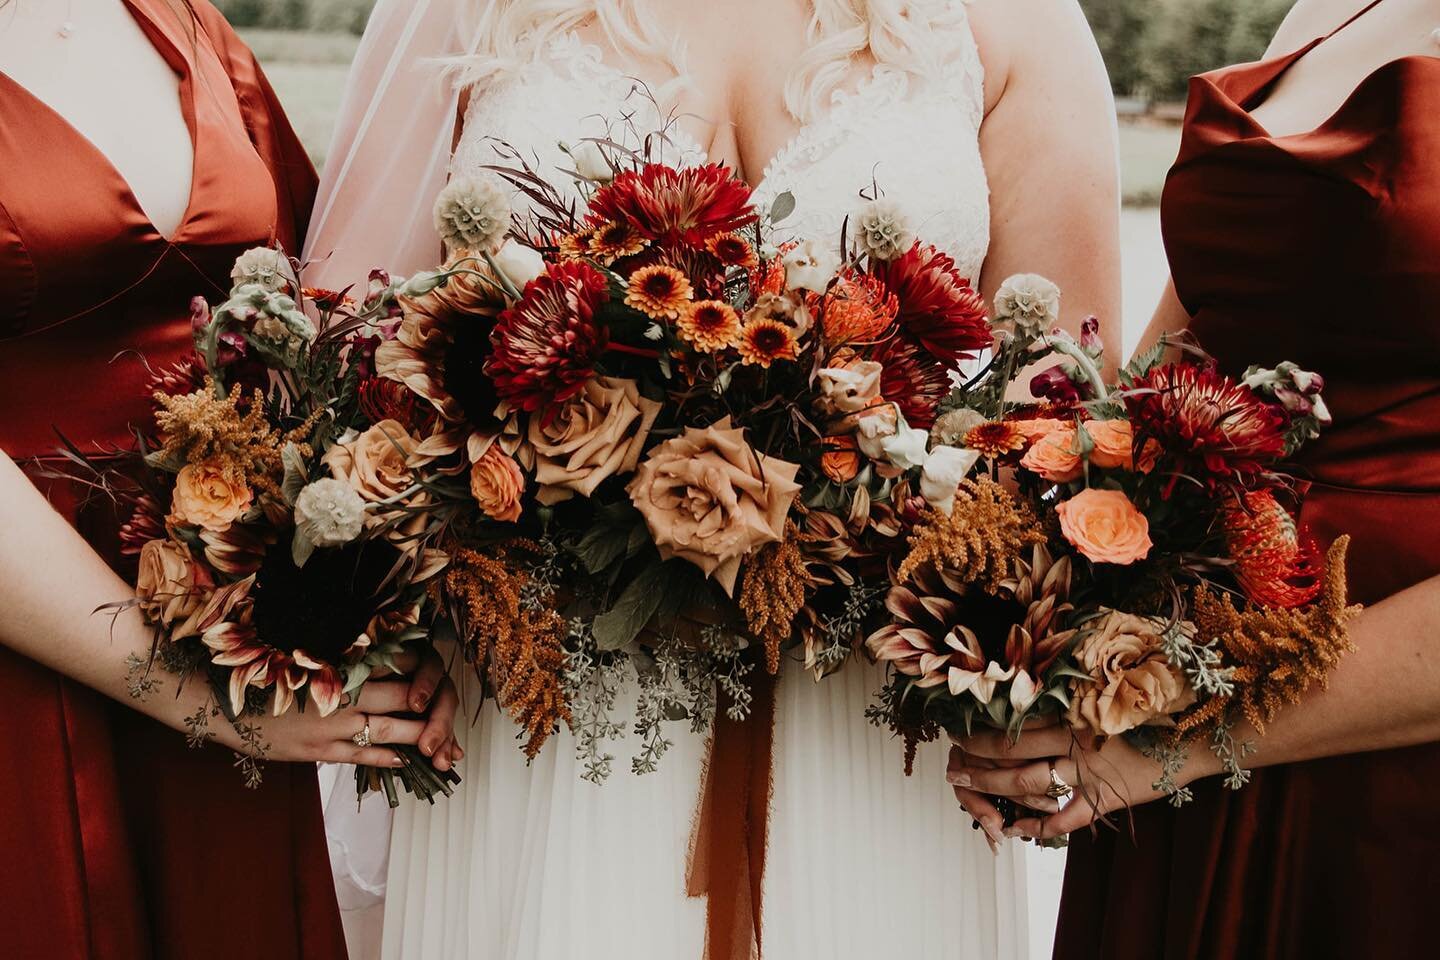 Florals from last weeks wedding! Fall colors will always be a favorite of mine! 🍁🧡